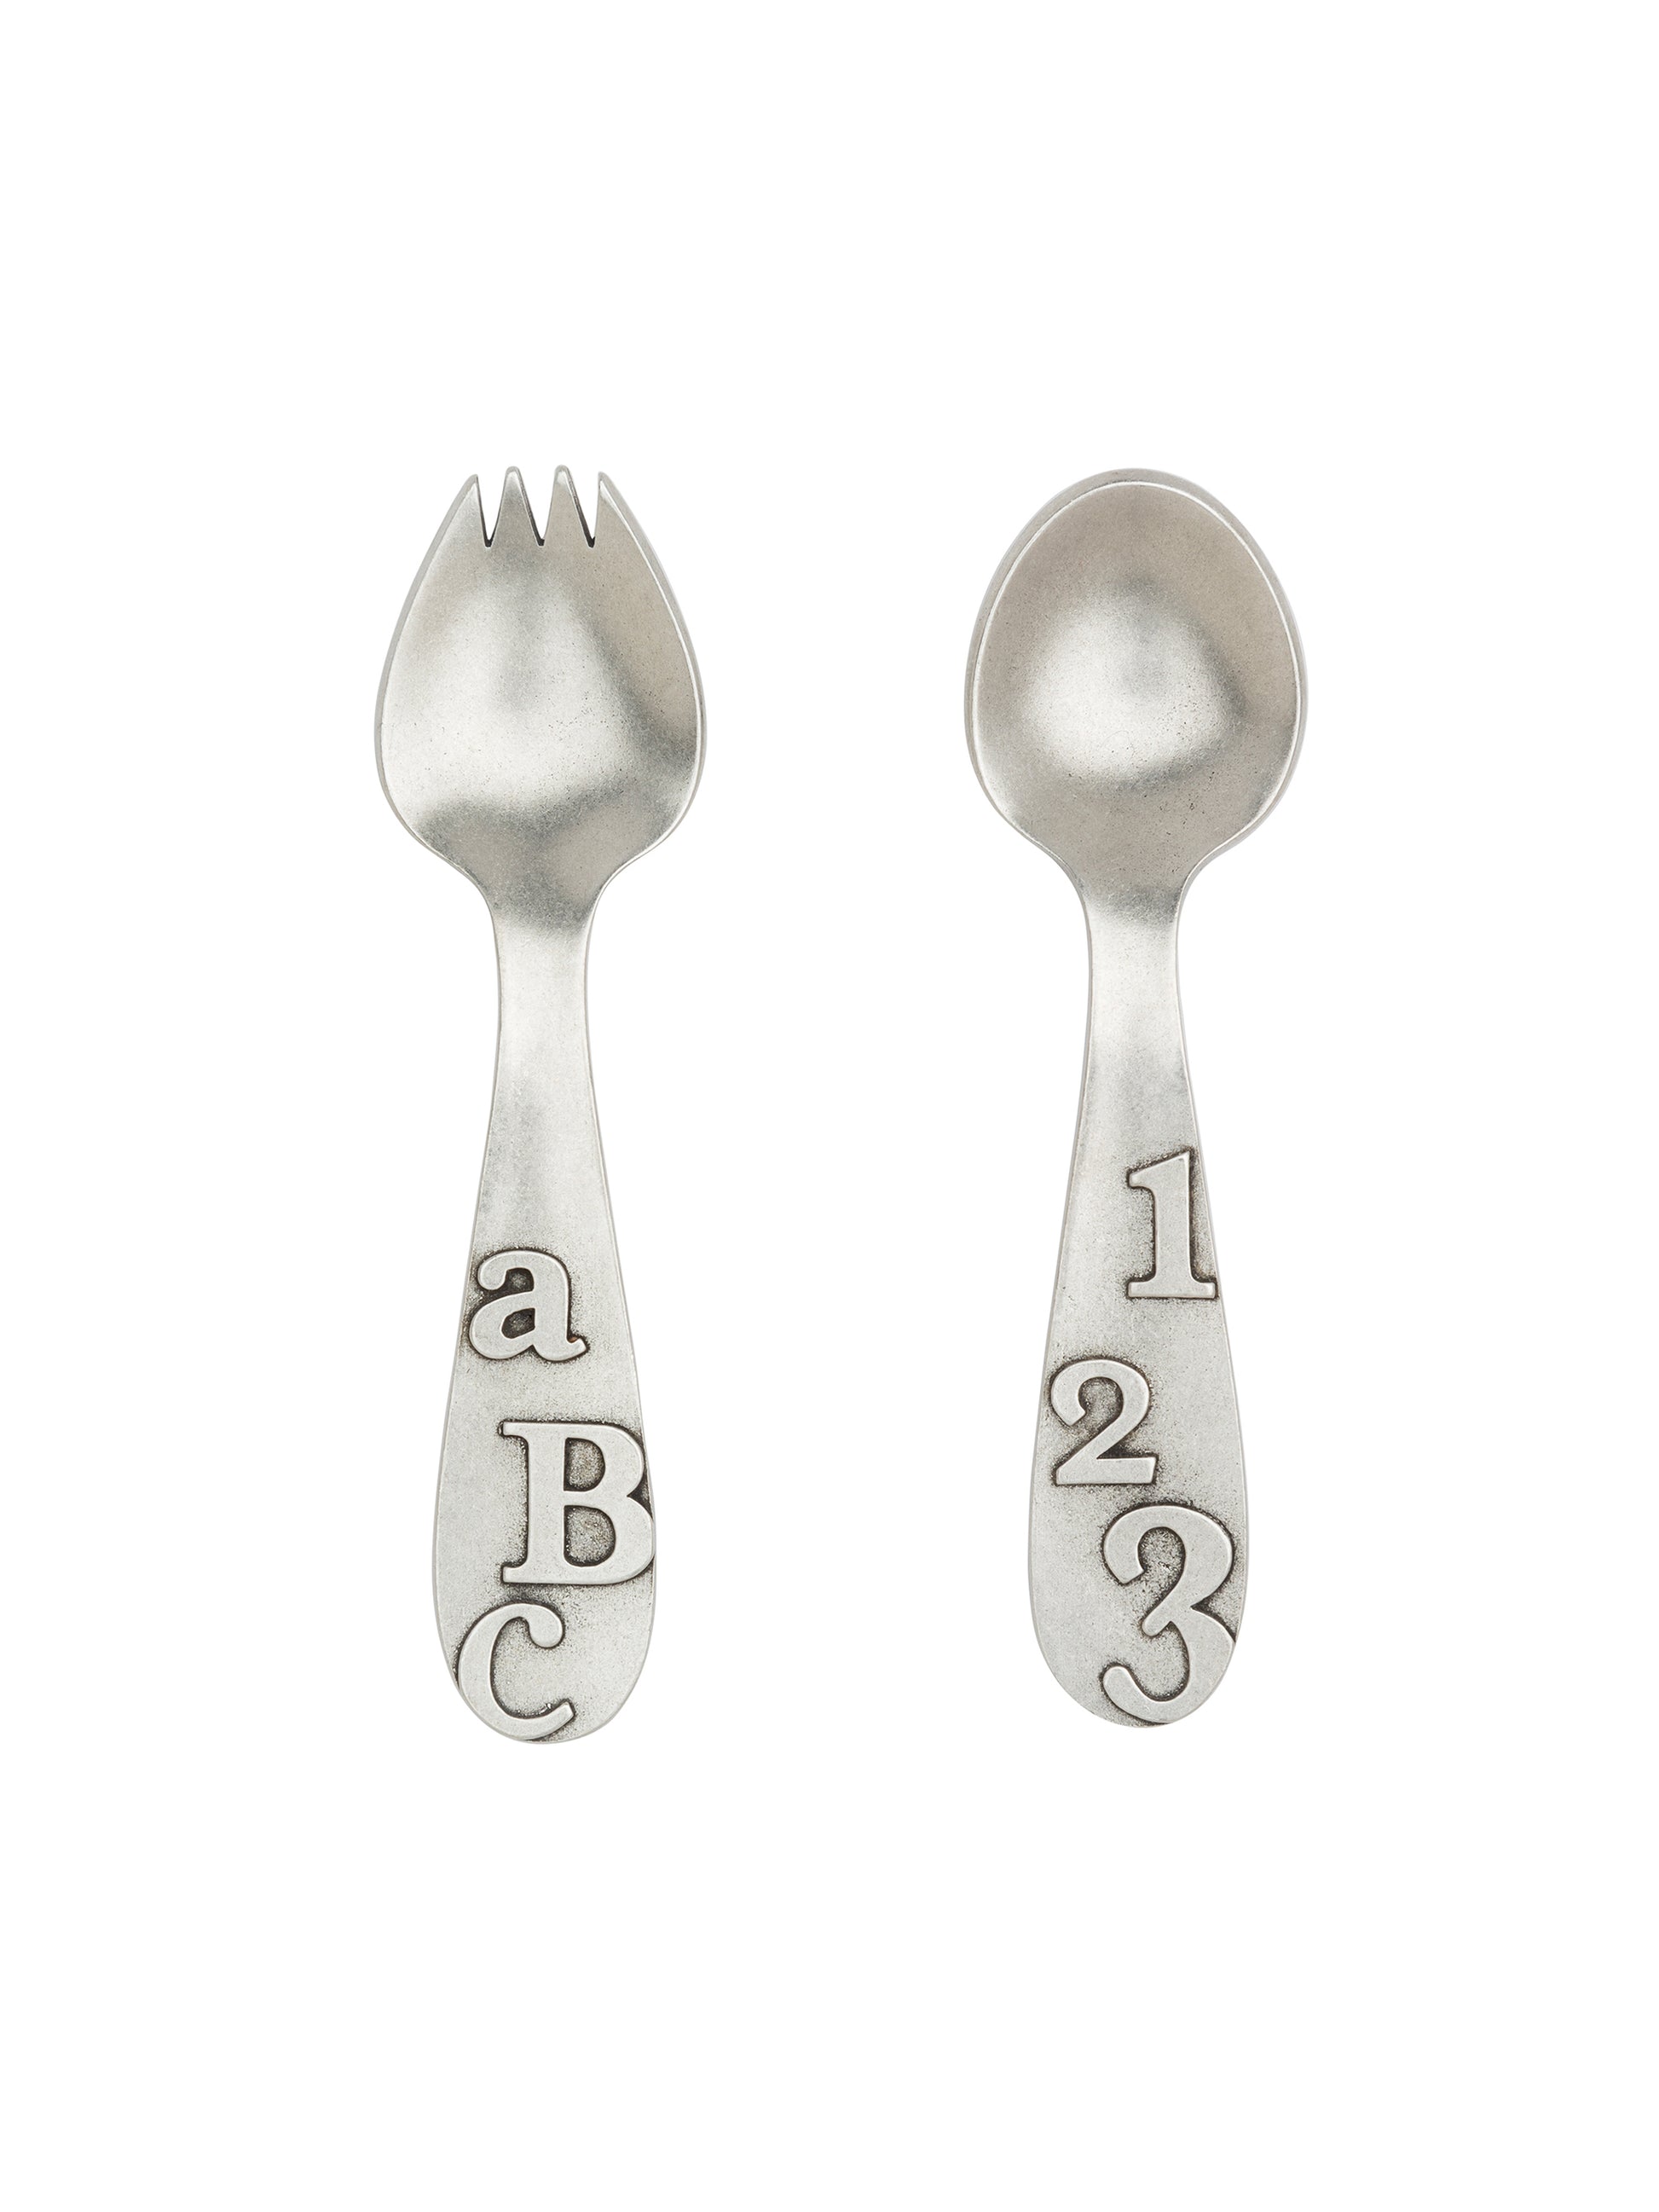 https://westontable.com/cdn/shop/products/Beehive-Handmade-Pewter-ABC-and-123-Fork-and-Spoon-Set-Weston-Table.jpg?v=1593281795&width=1946